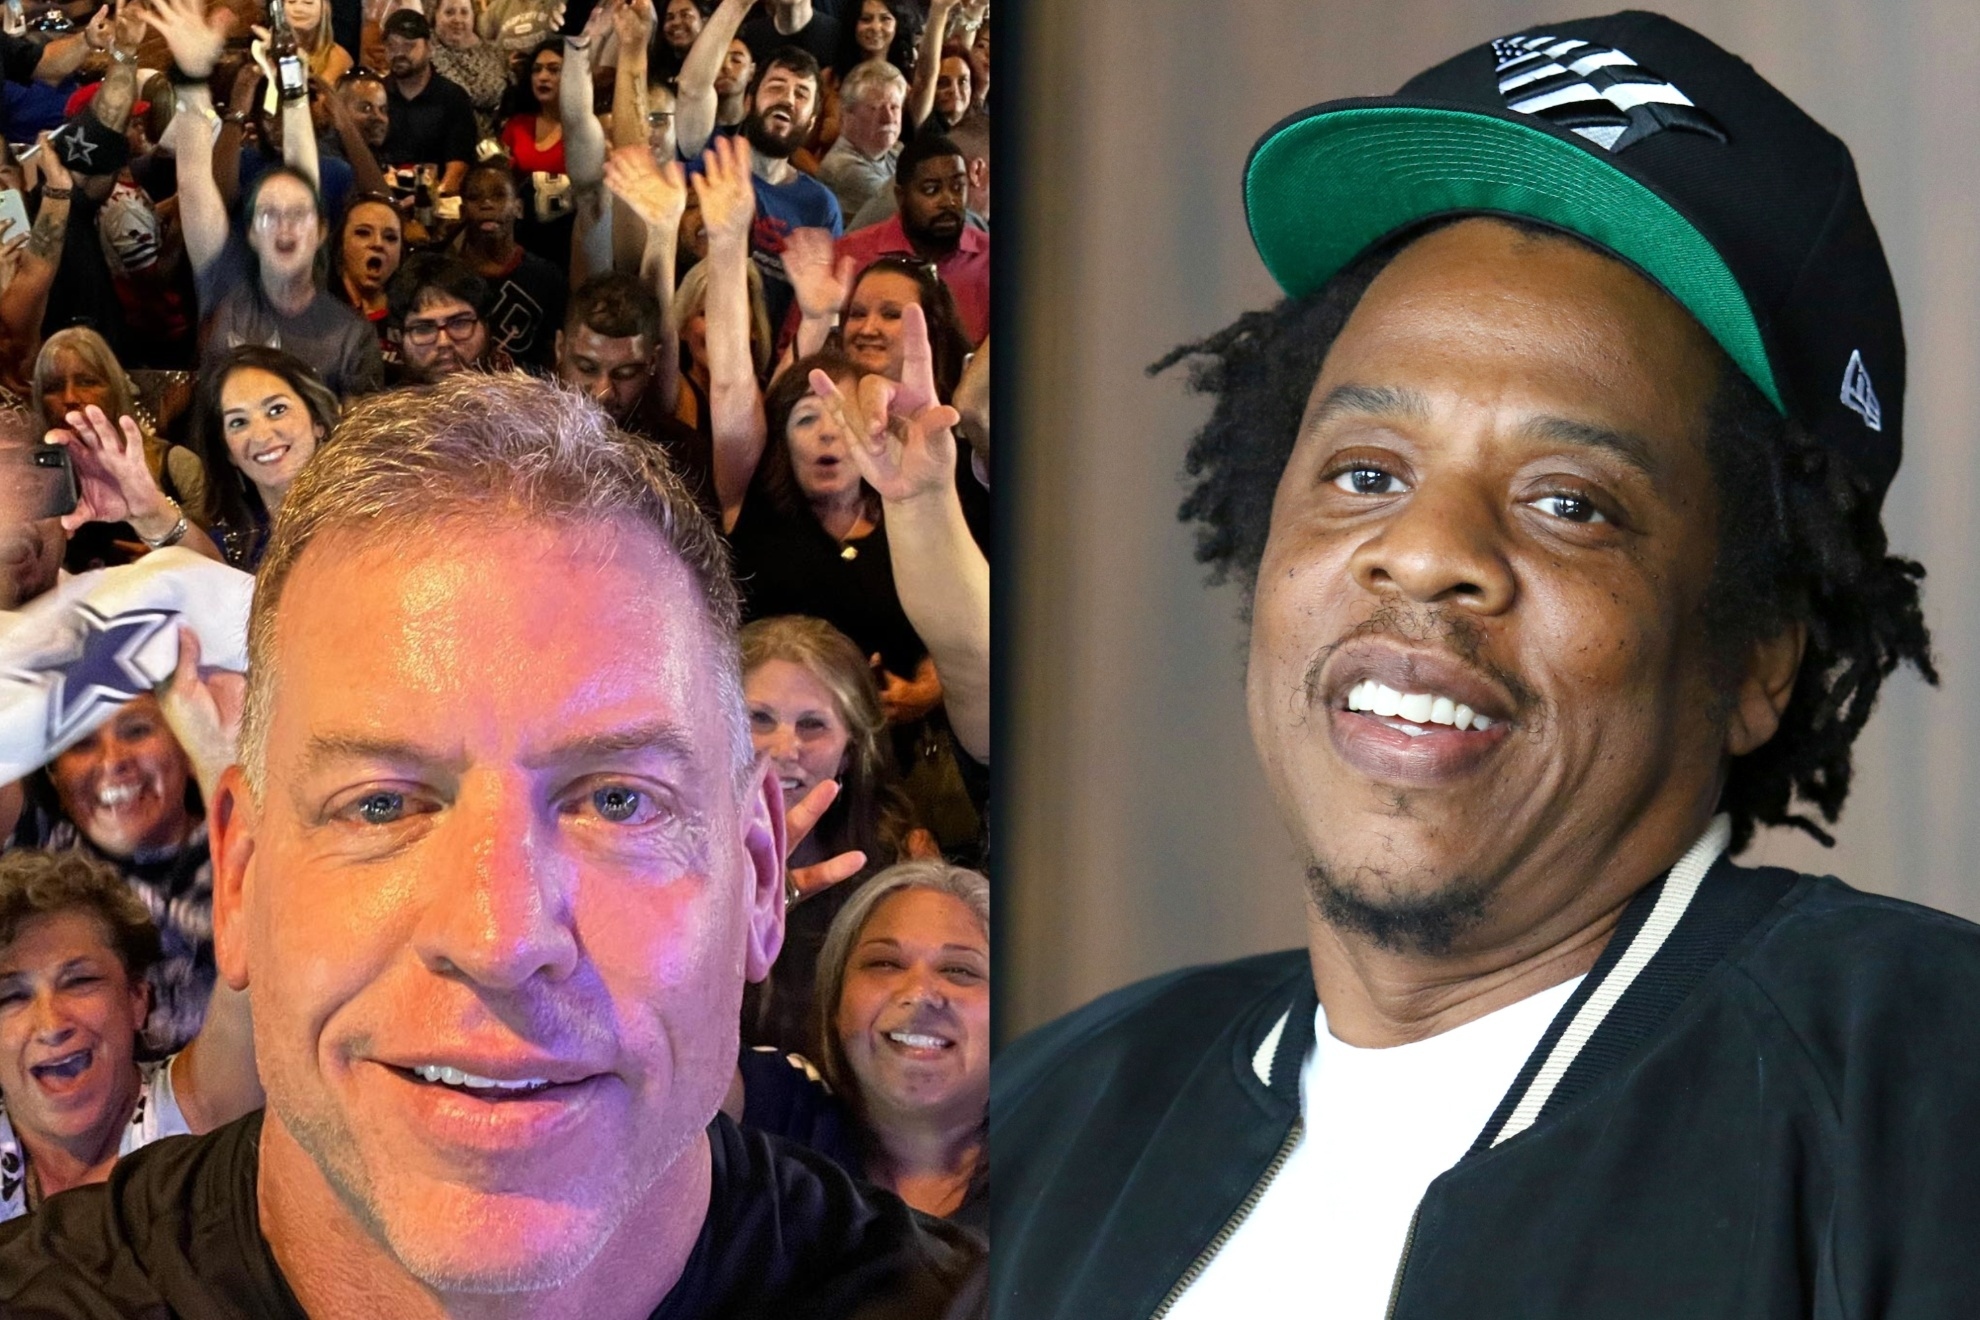 Mashup image of Troy Aikman and Jay-Z